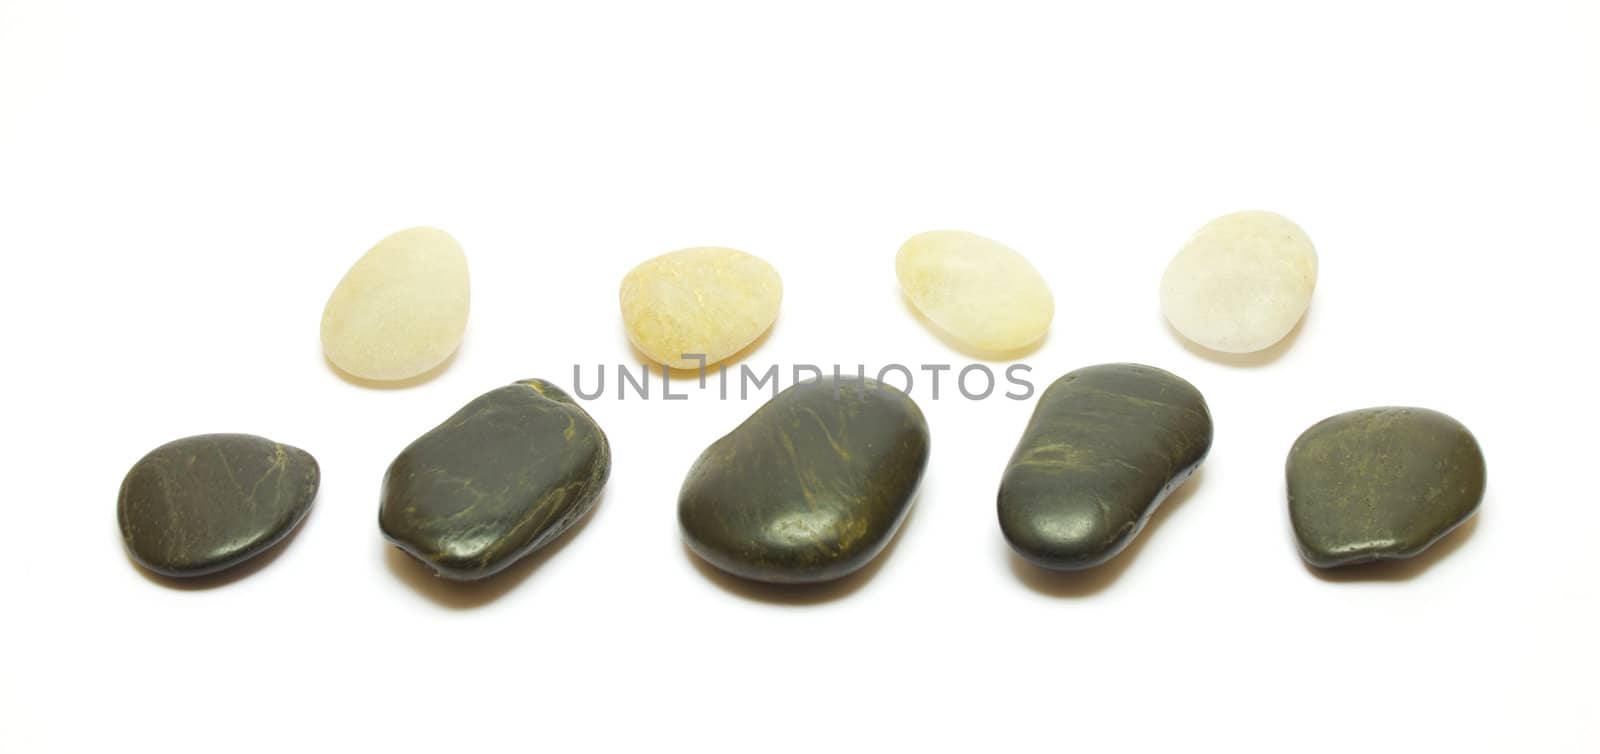 Black and white stones row isolated on white background